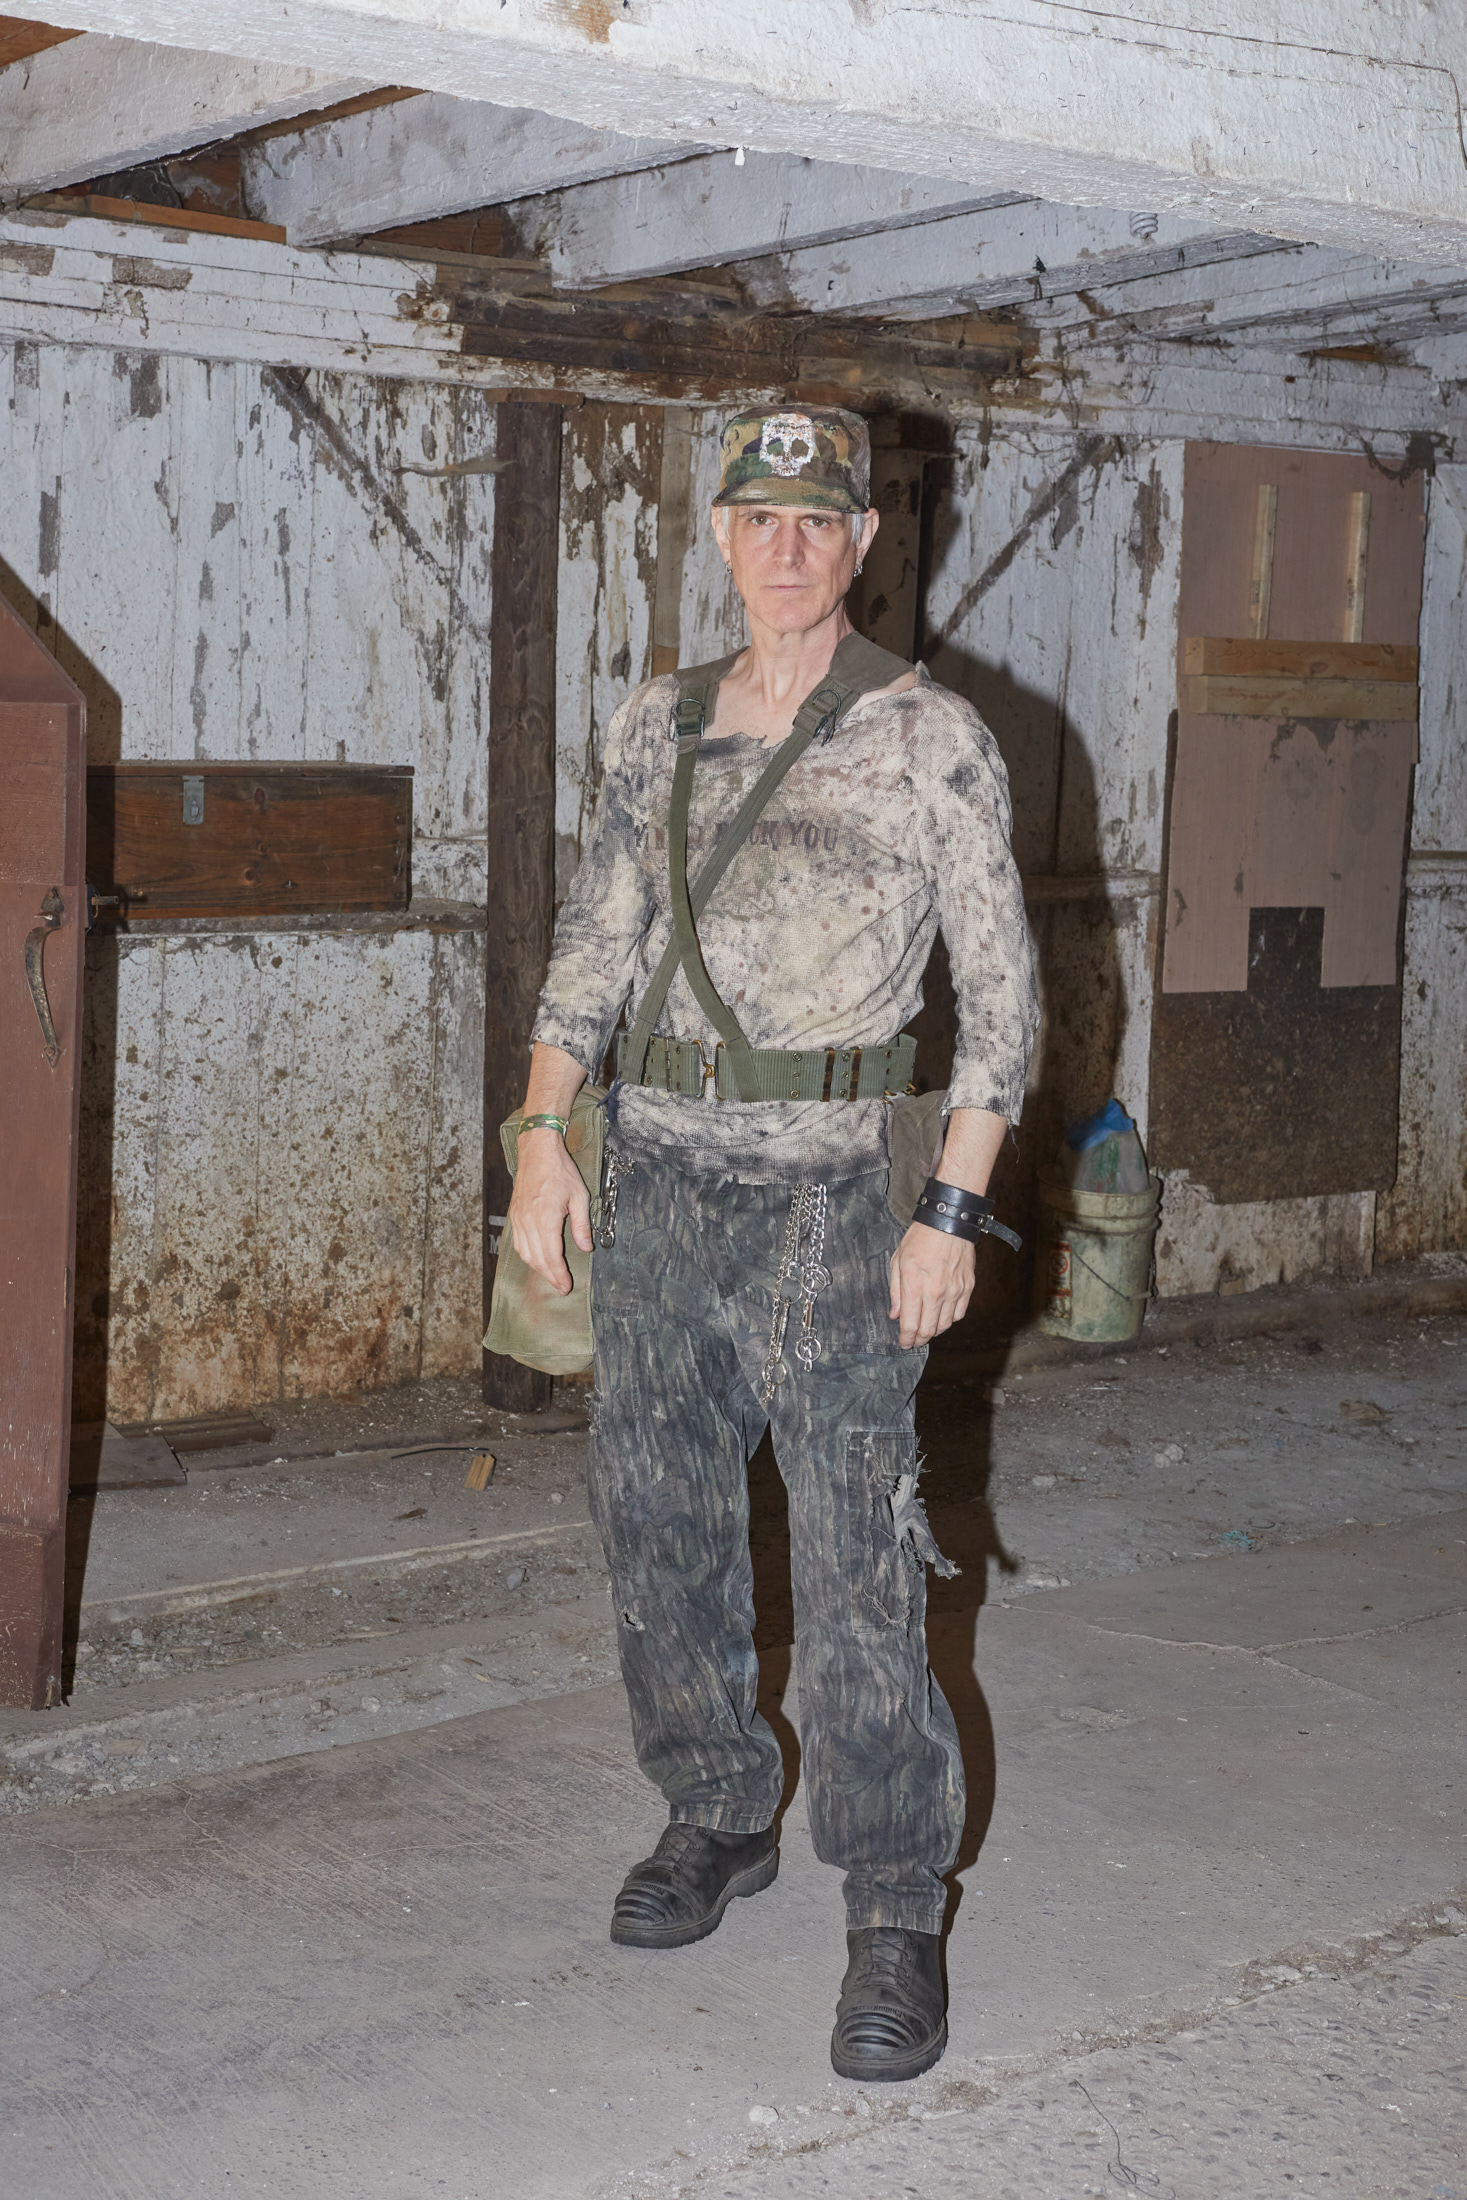 A man dressed in camouflage stands inside a dirty barn  